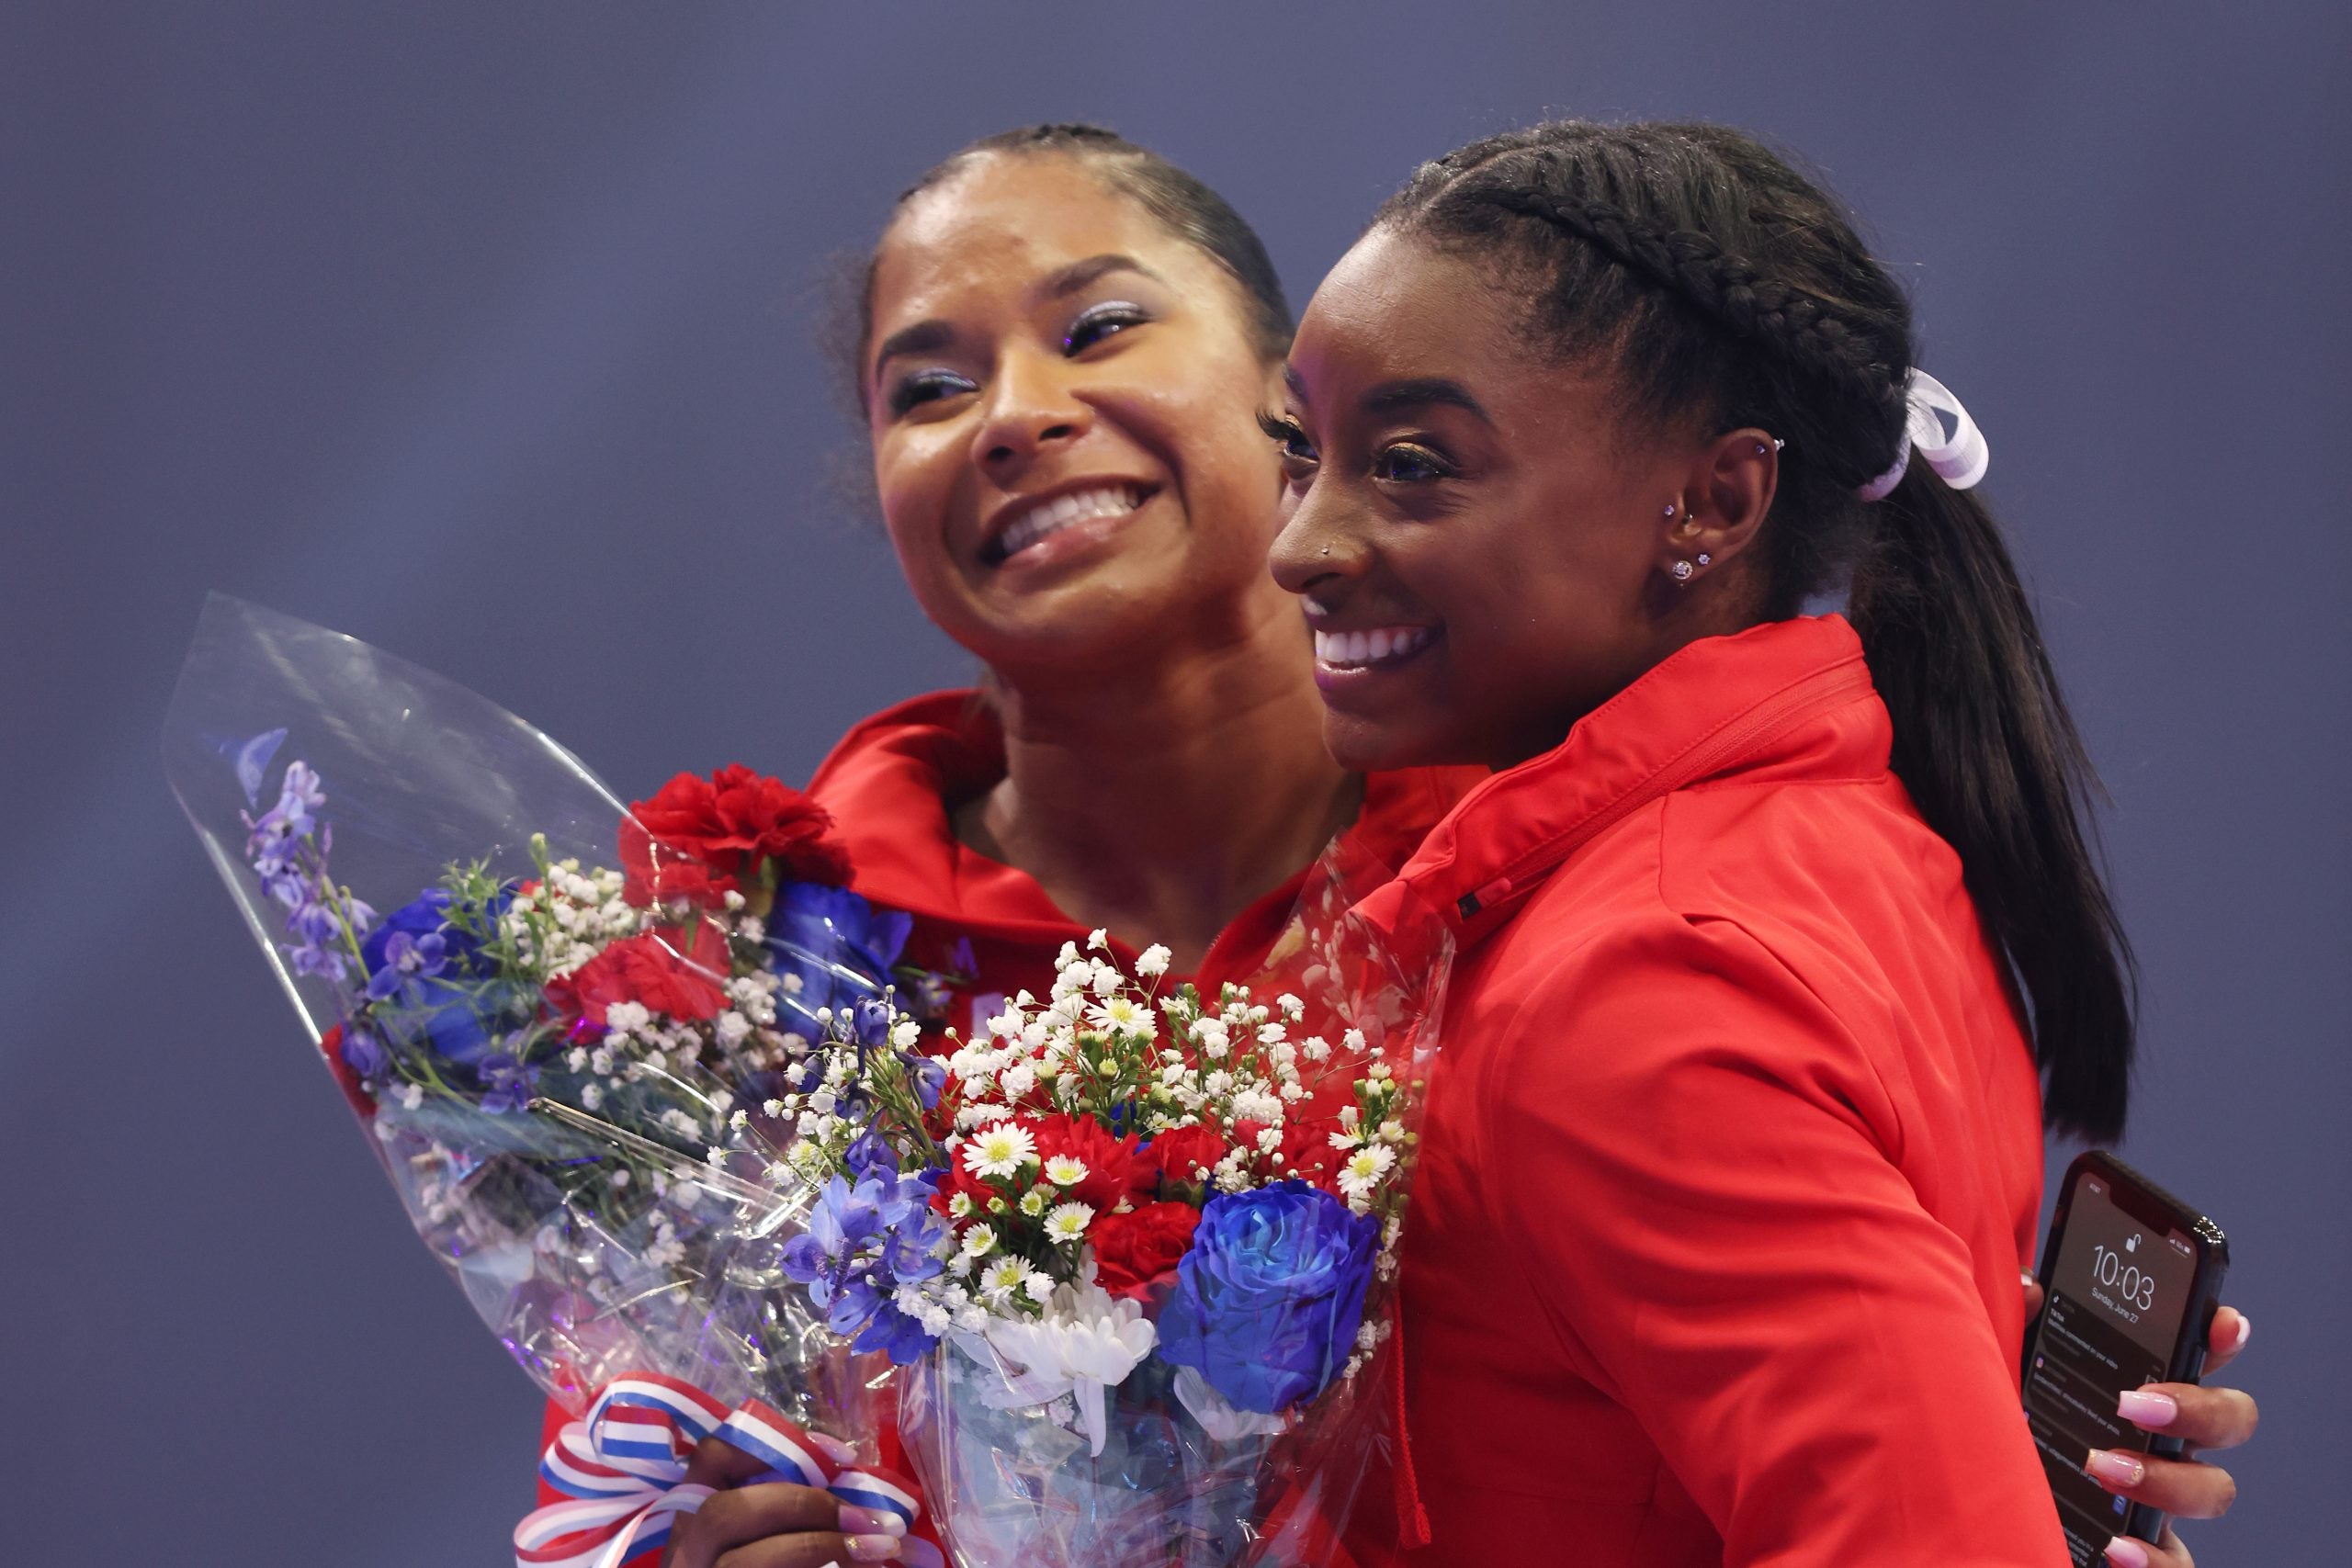 Jordan Chiles Almost Quit Gymnastics, Simone Biles Encouraged Her Not To. Now They're Going To The Olympics Together.